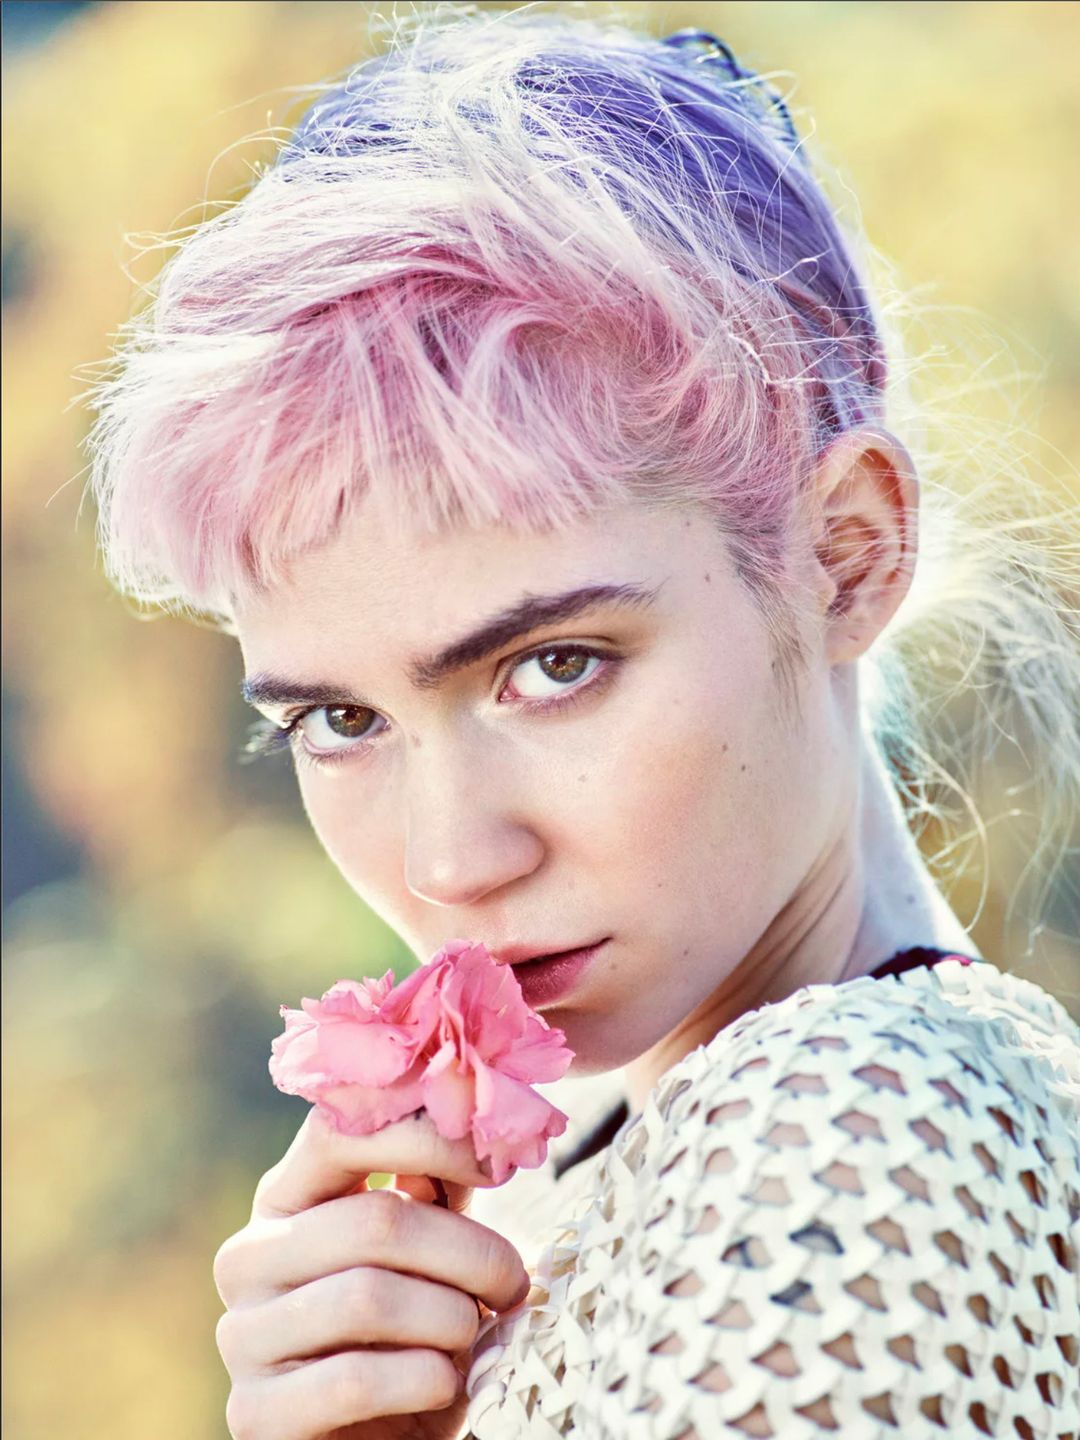 Grimes early life